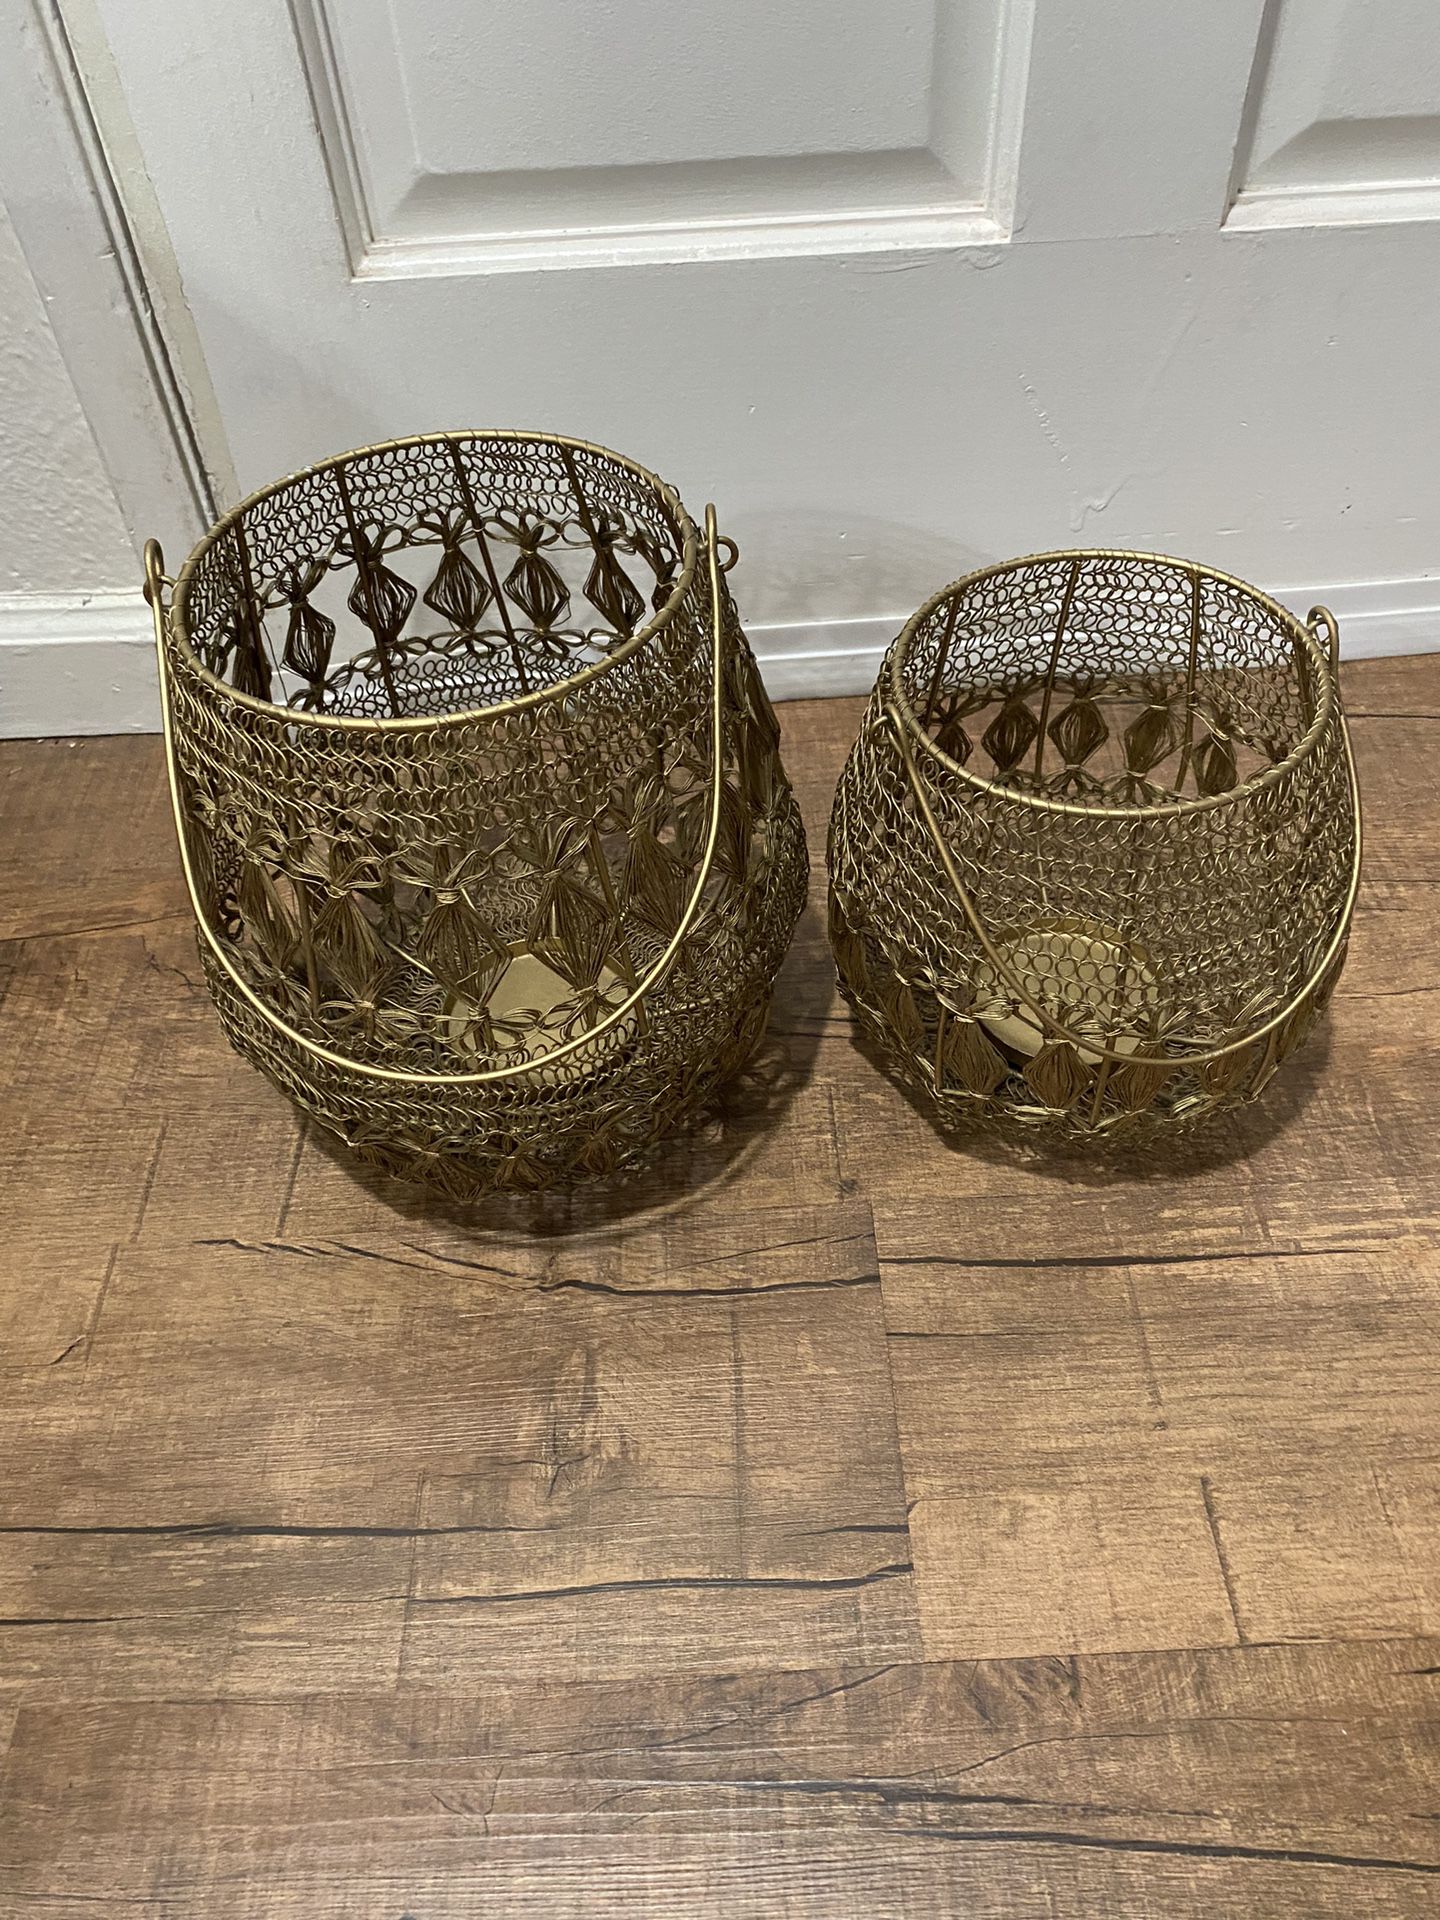 Cute Set Of Two Candle Holder $35 